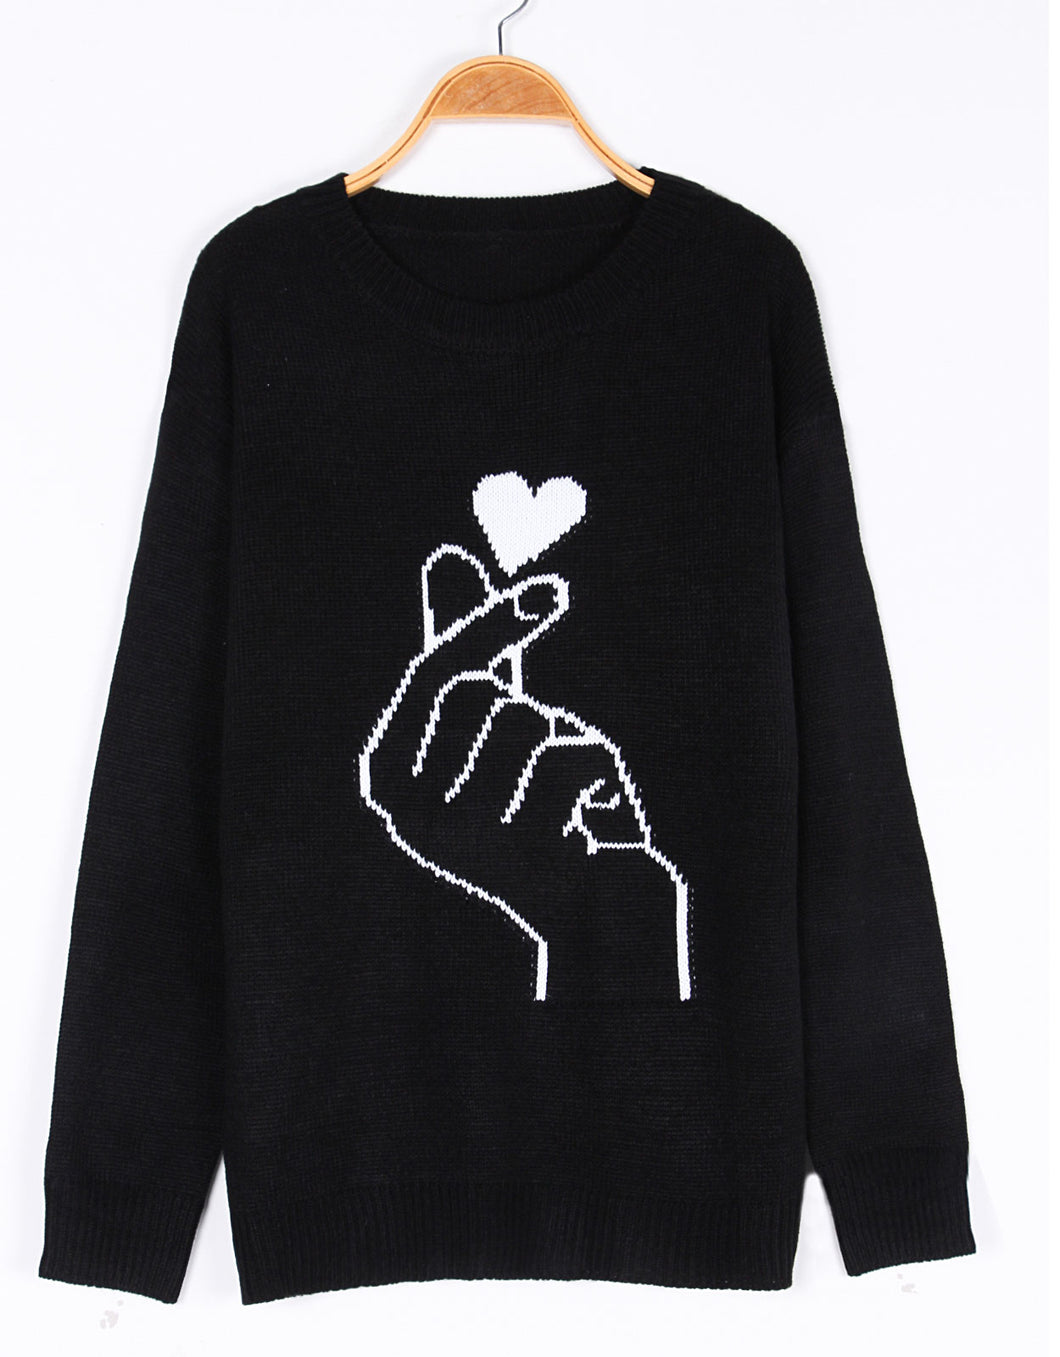 Love You Cute Heart Knitted Sweater